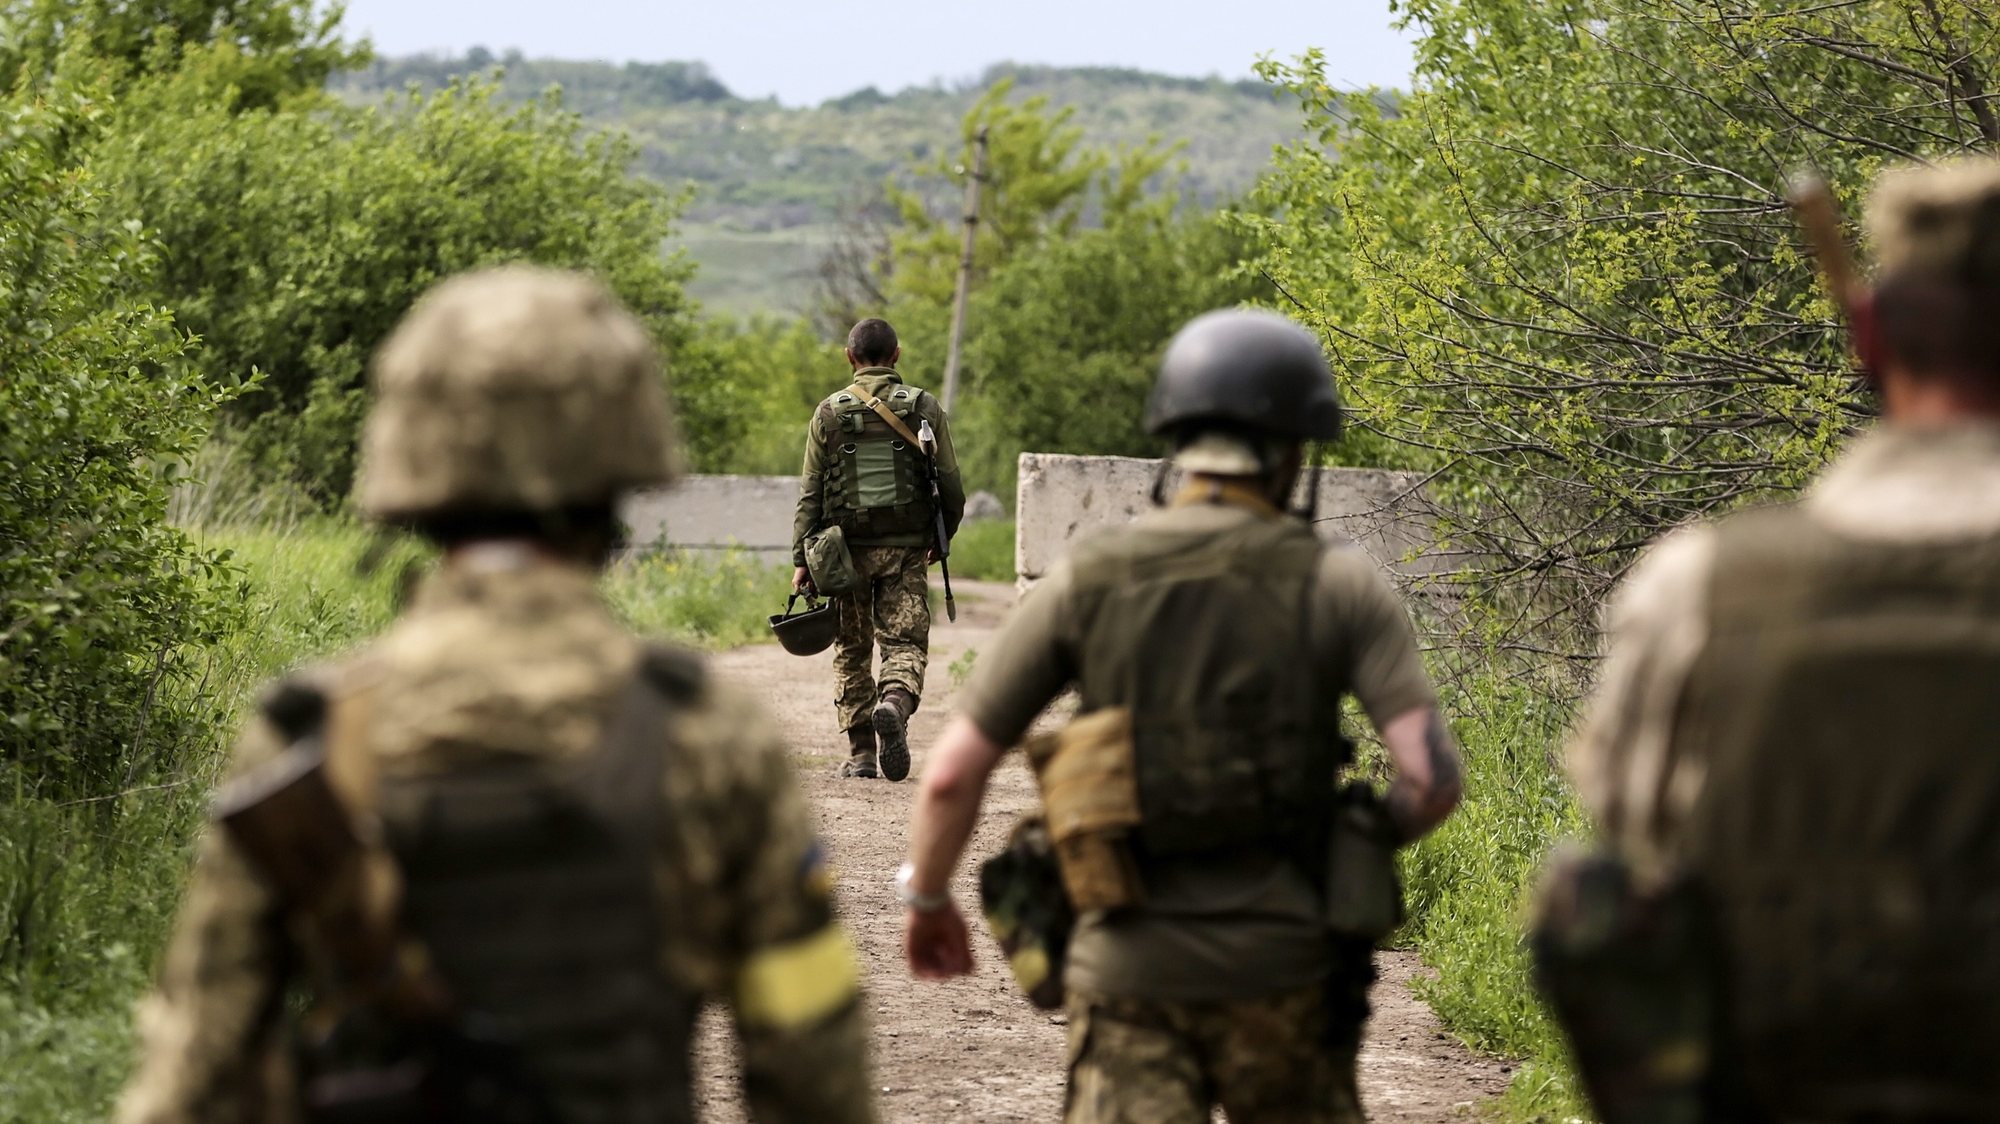 epa09985030 Ukrainian servicemen walk to their positions near the Zaytseve village of the Donetsk region, Ukraine, 29 May 2022. On 24 February, Russian troops invaded Ukrainian territory starting a conflict that has provoked destruction and a humanitarian crisis. According to the UNHCR, more than 6.5 million refugees are estimated to have fled Ukraine, and a further seven million people estimated to have been displaced internally within Ukraine since.  EPA/STR